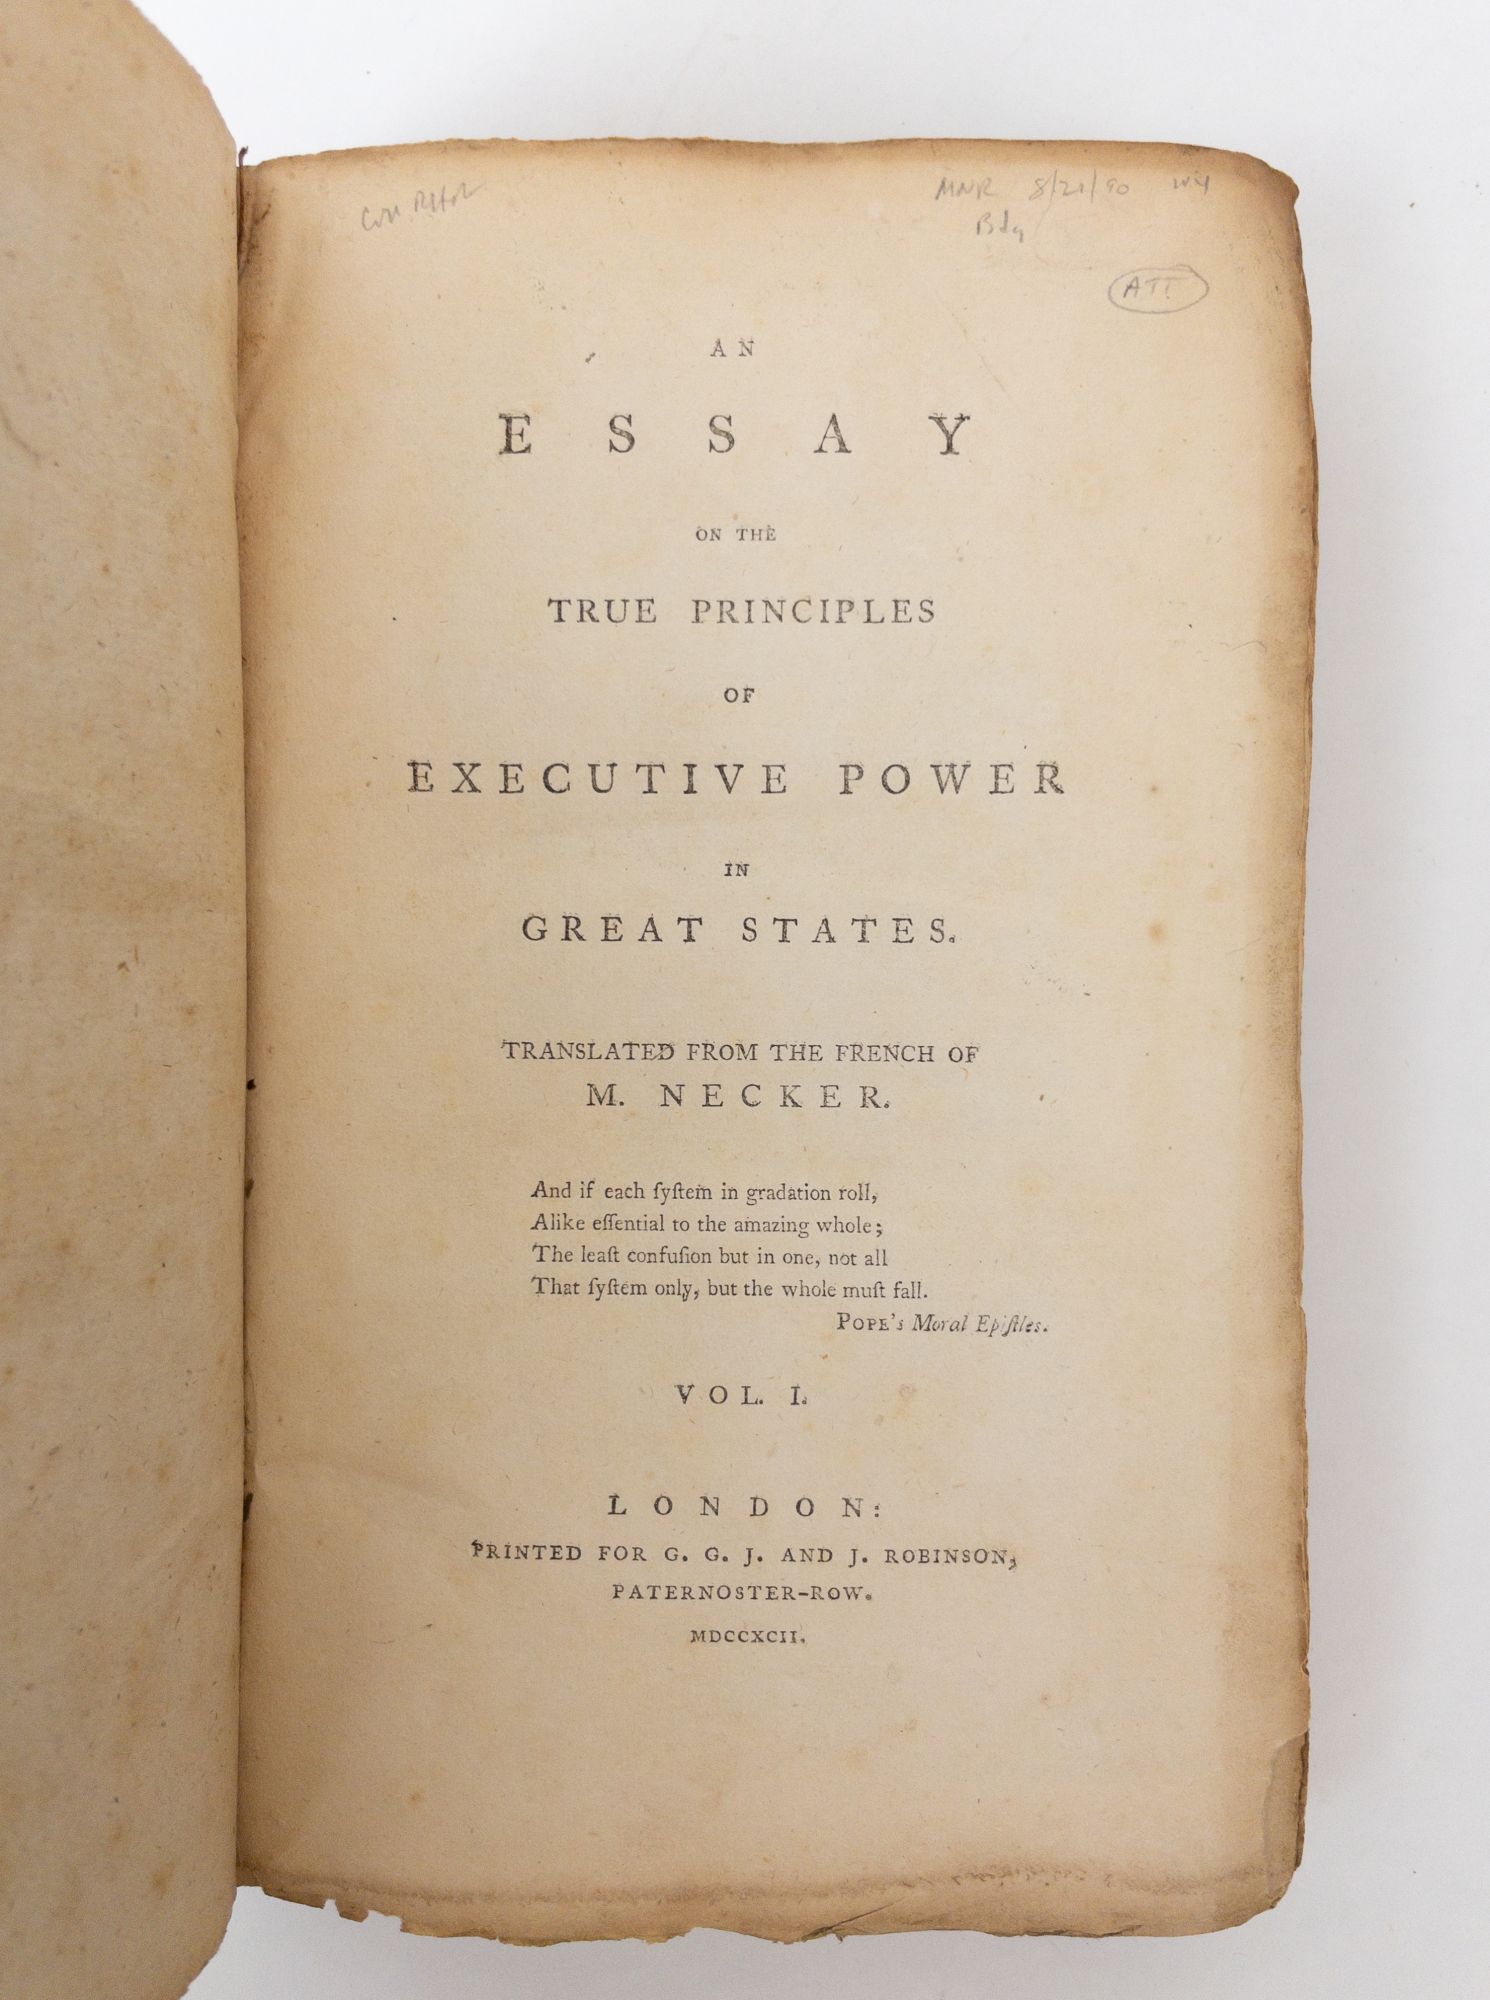 Product Image for AN ESSAY ON THE TRUE PRINCIPLES OF EXECUTIVE POWER IN GREAT STATES [Two Volumes]